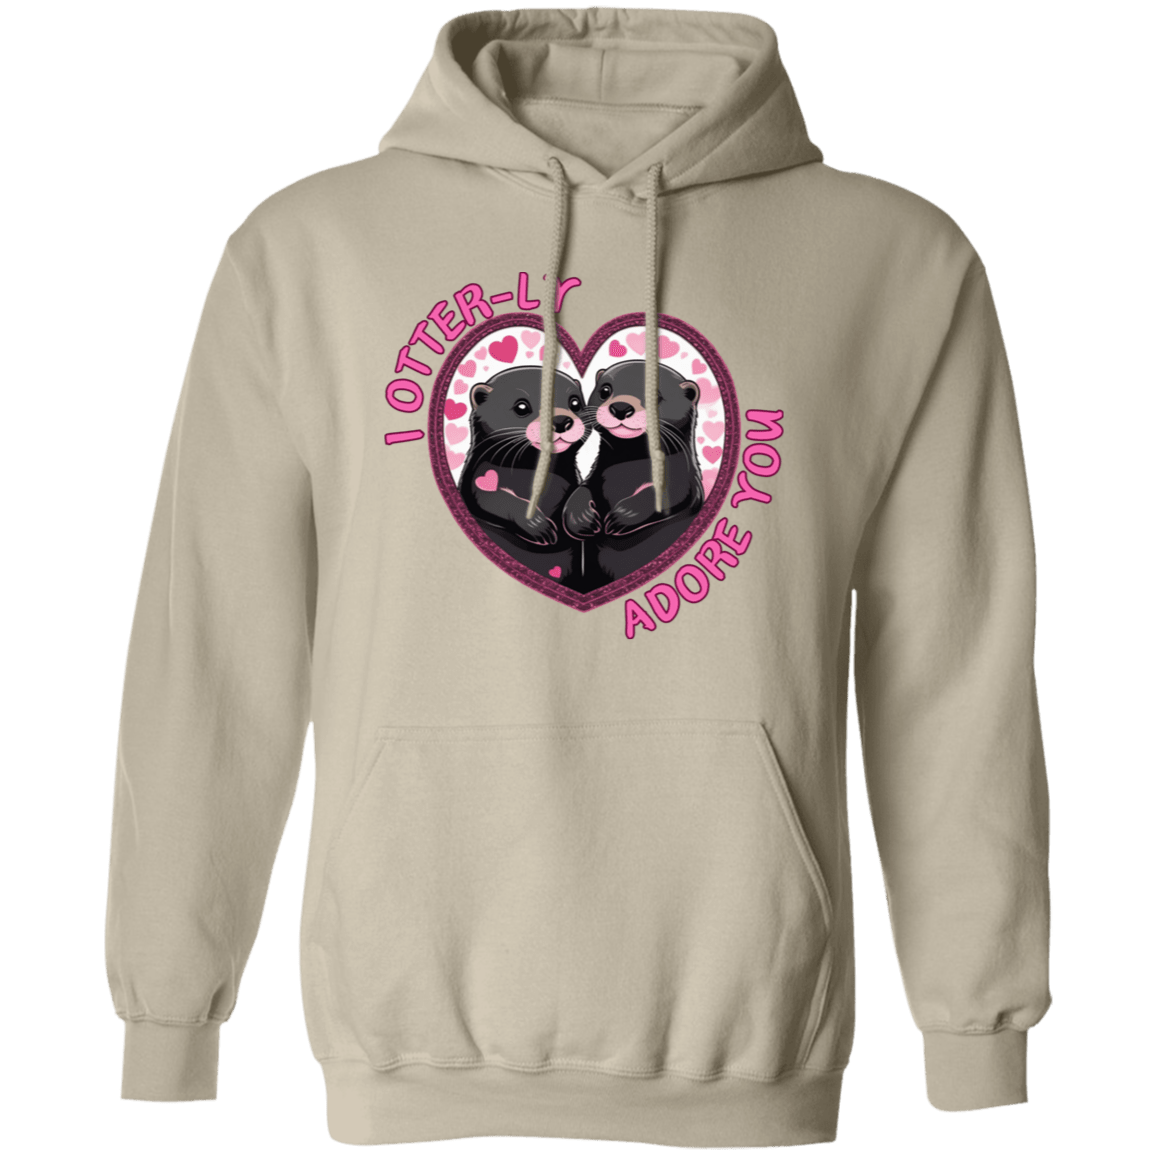 I Otter-ly  Adore You Pullover Hoodie